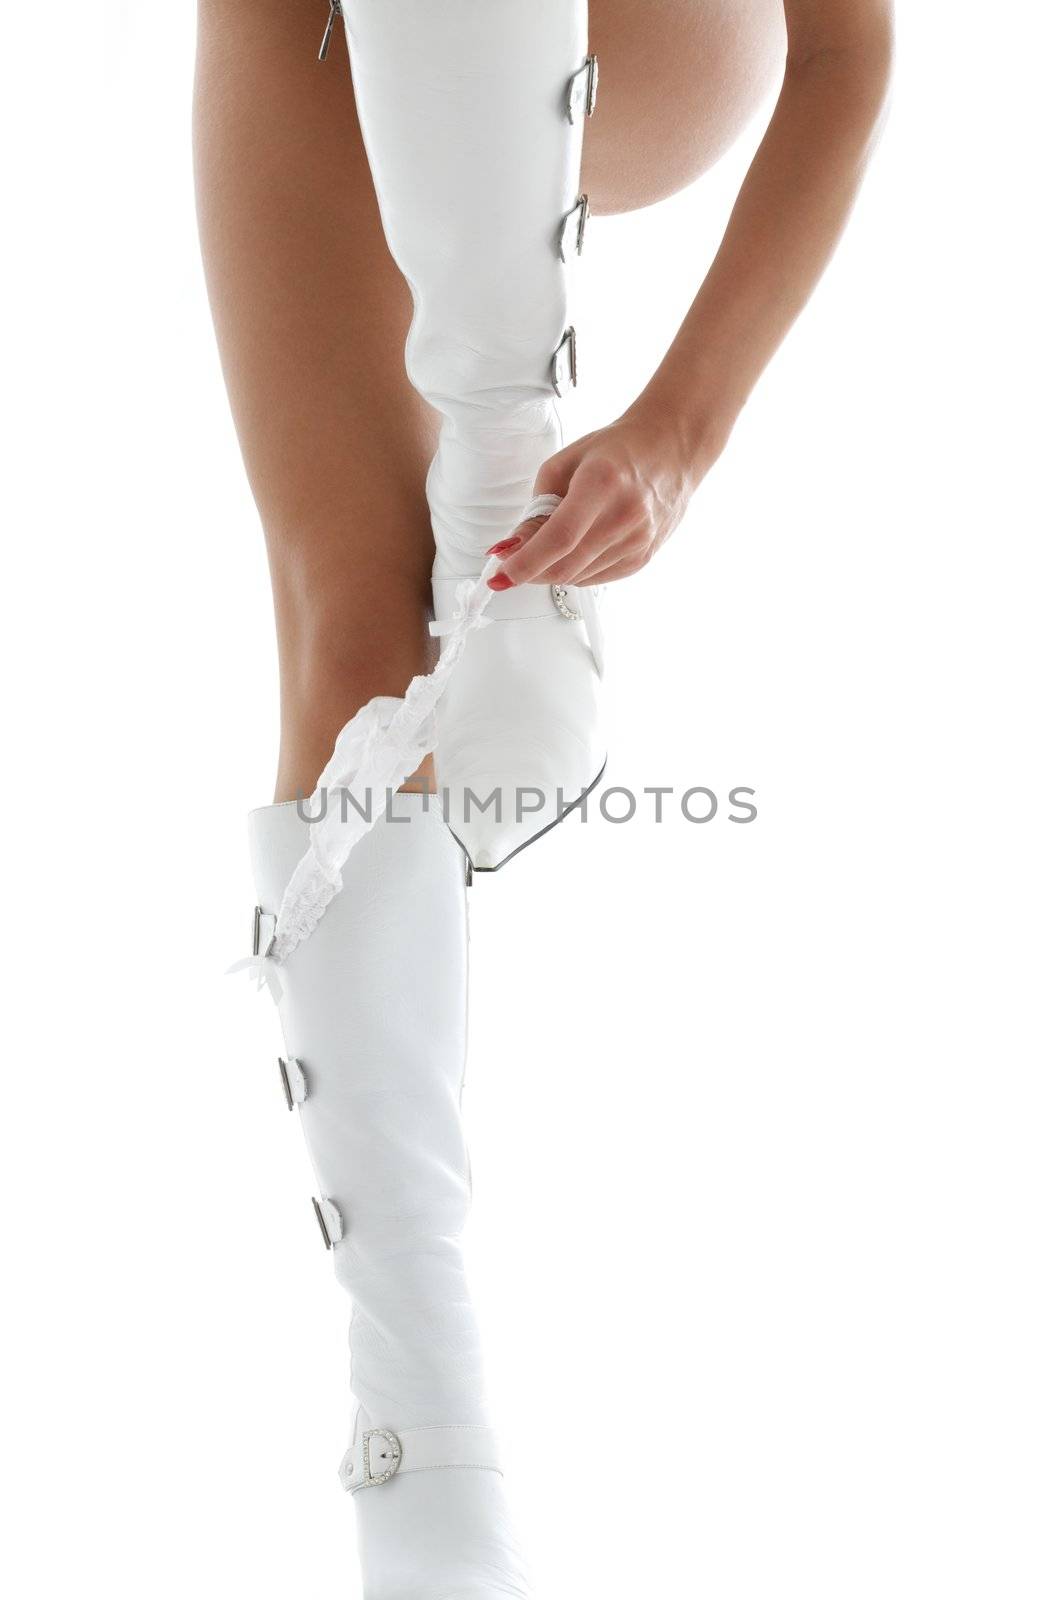 white leather boots and panties by dolgachov